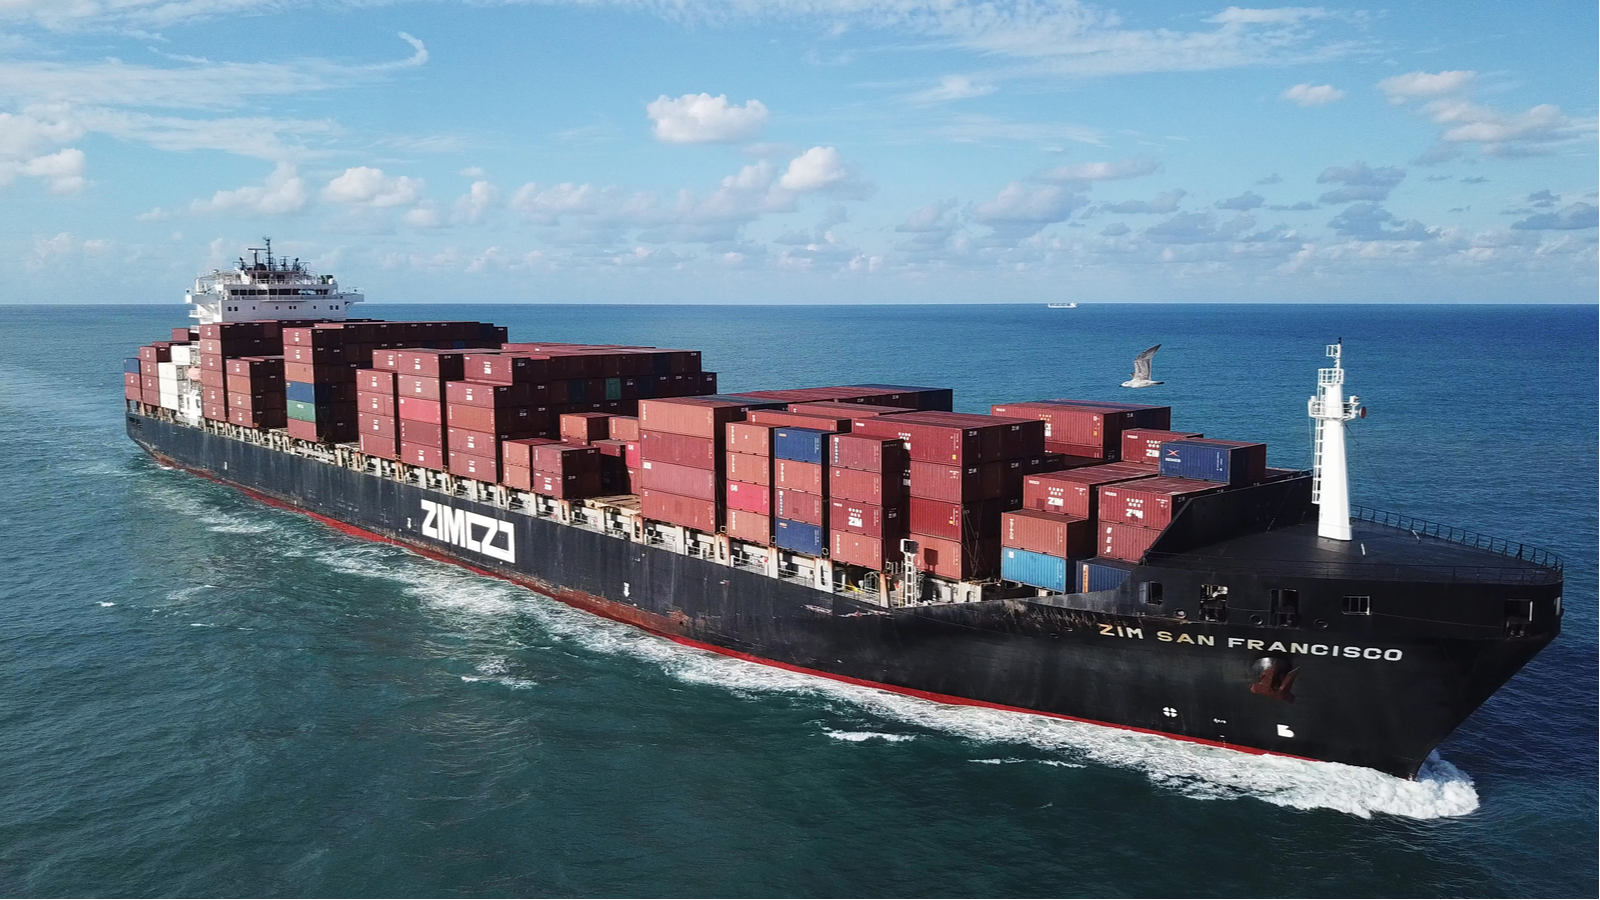 A large ULCV container ship underway, sails on open water fully loaded with containers and cargo - the ZIM San Francisco, representing zim stock.